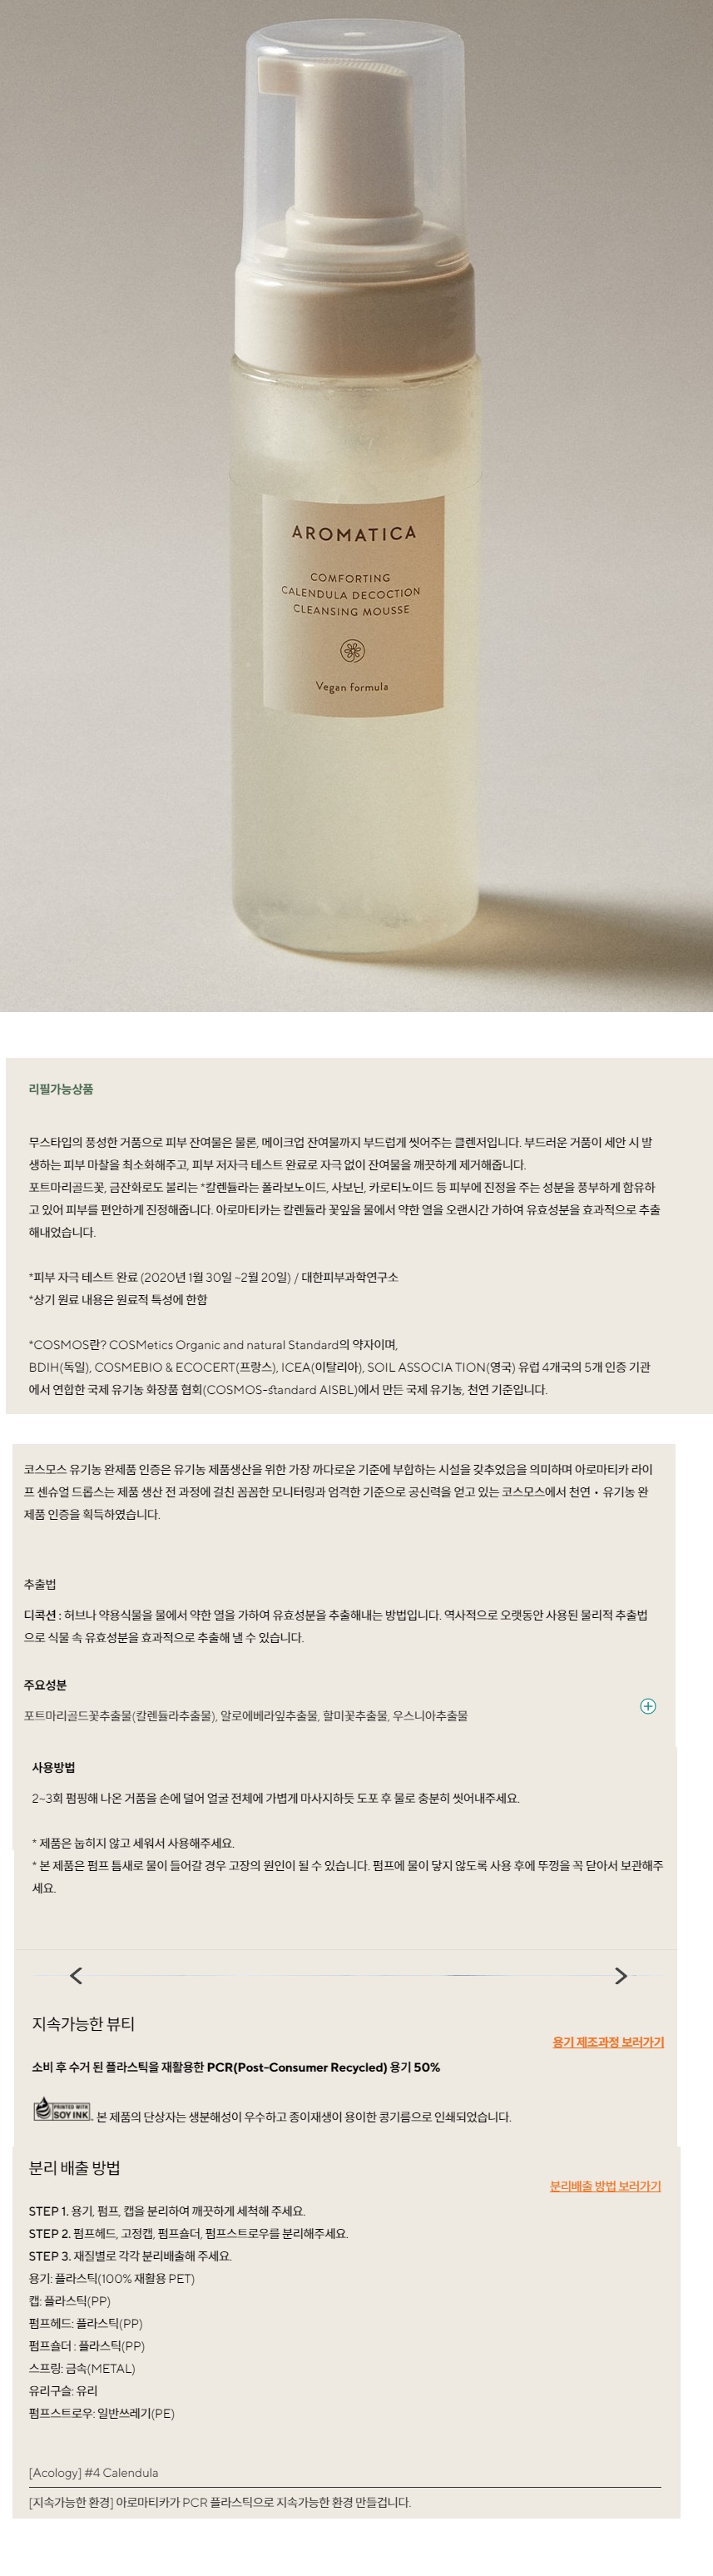 Aromatica Comforting Calendula Decoction Cleansing Mousse korean skincare product online shop malaysia hong kong canada1